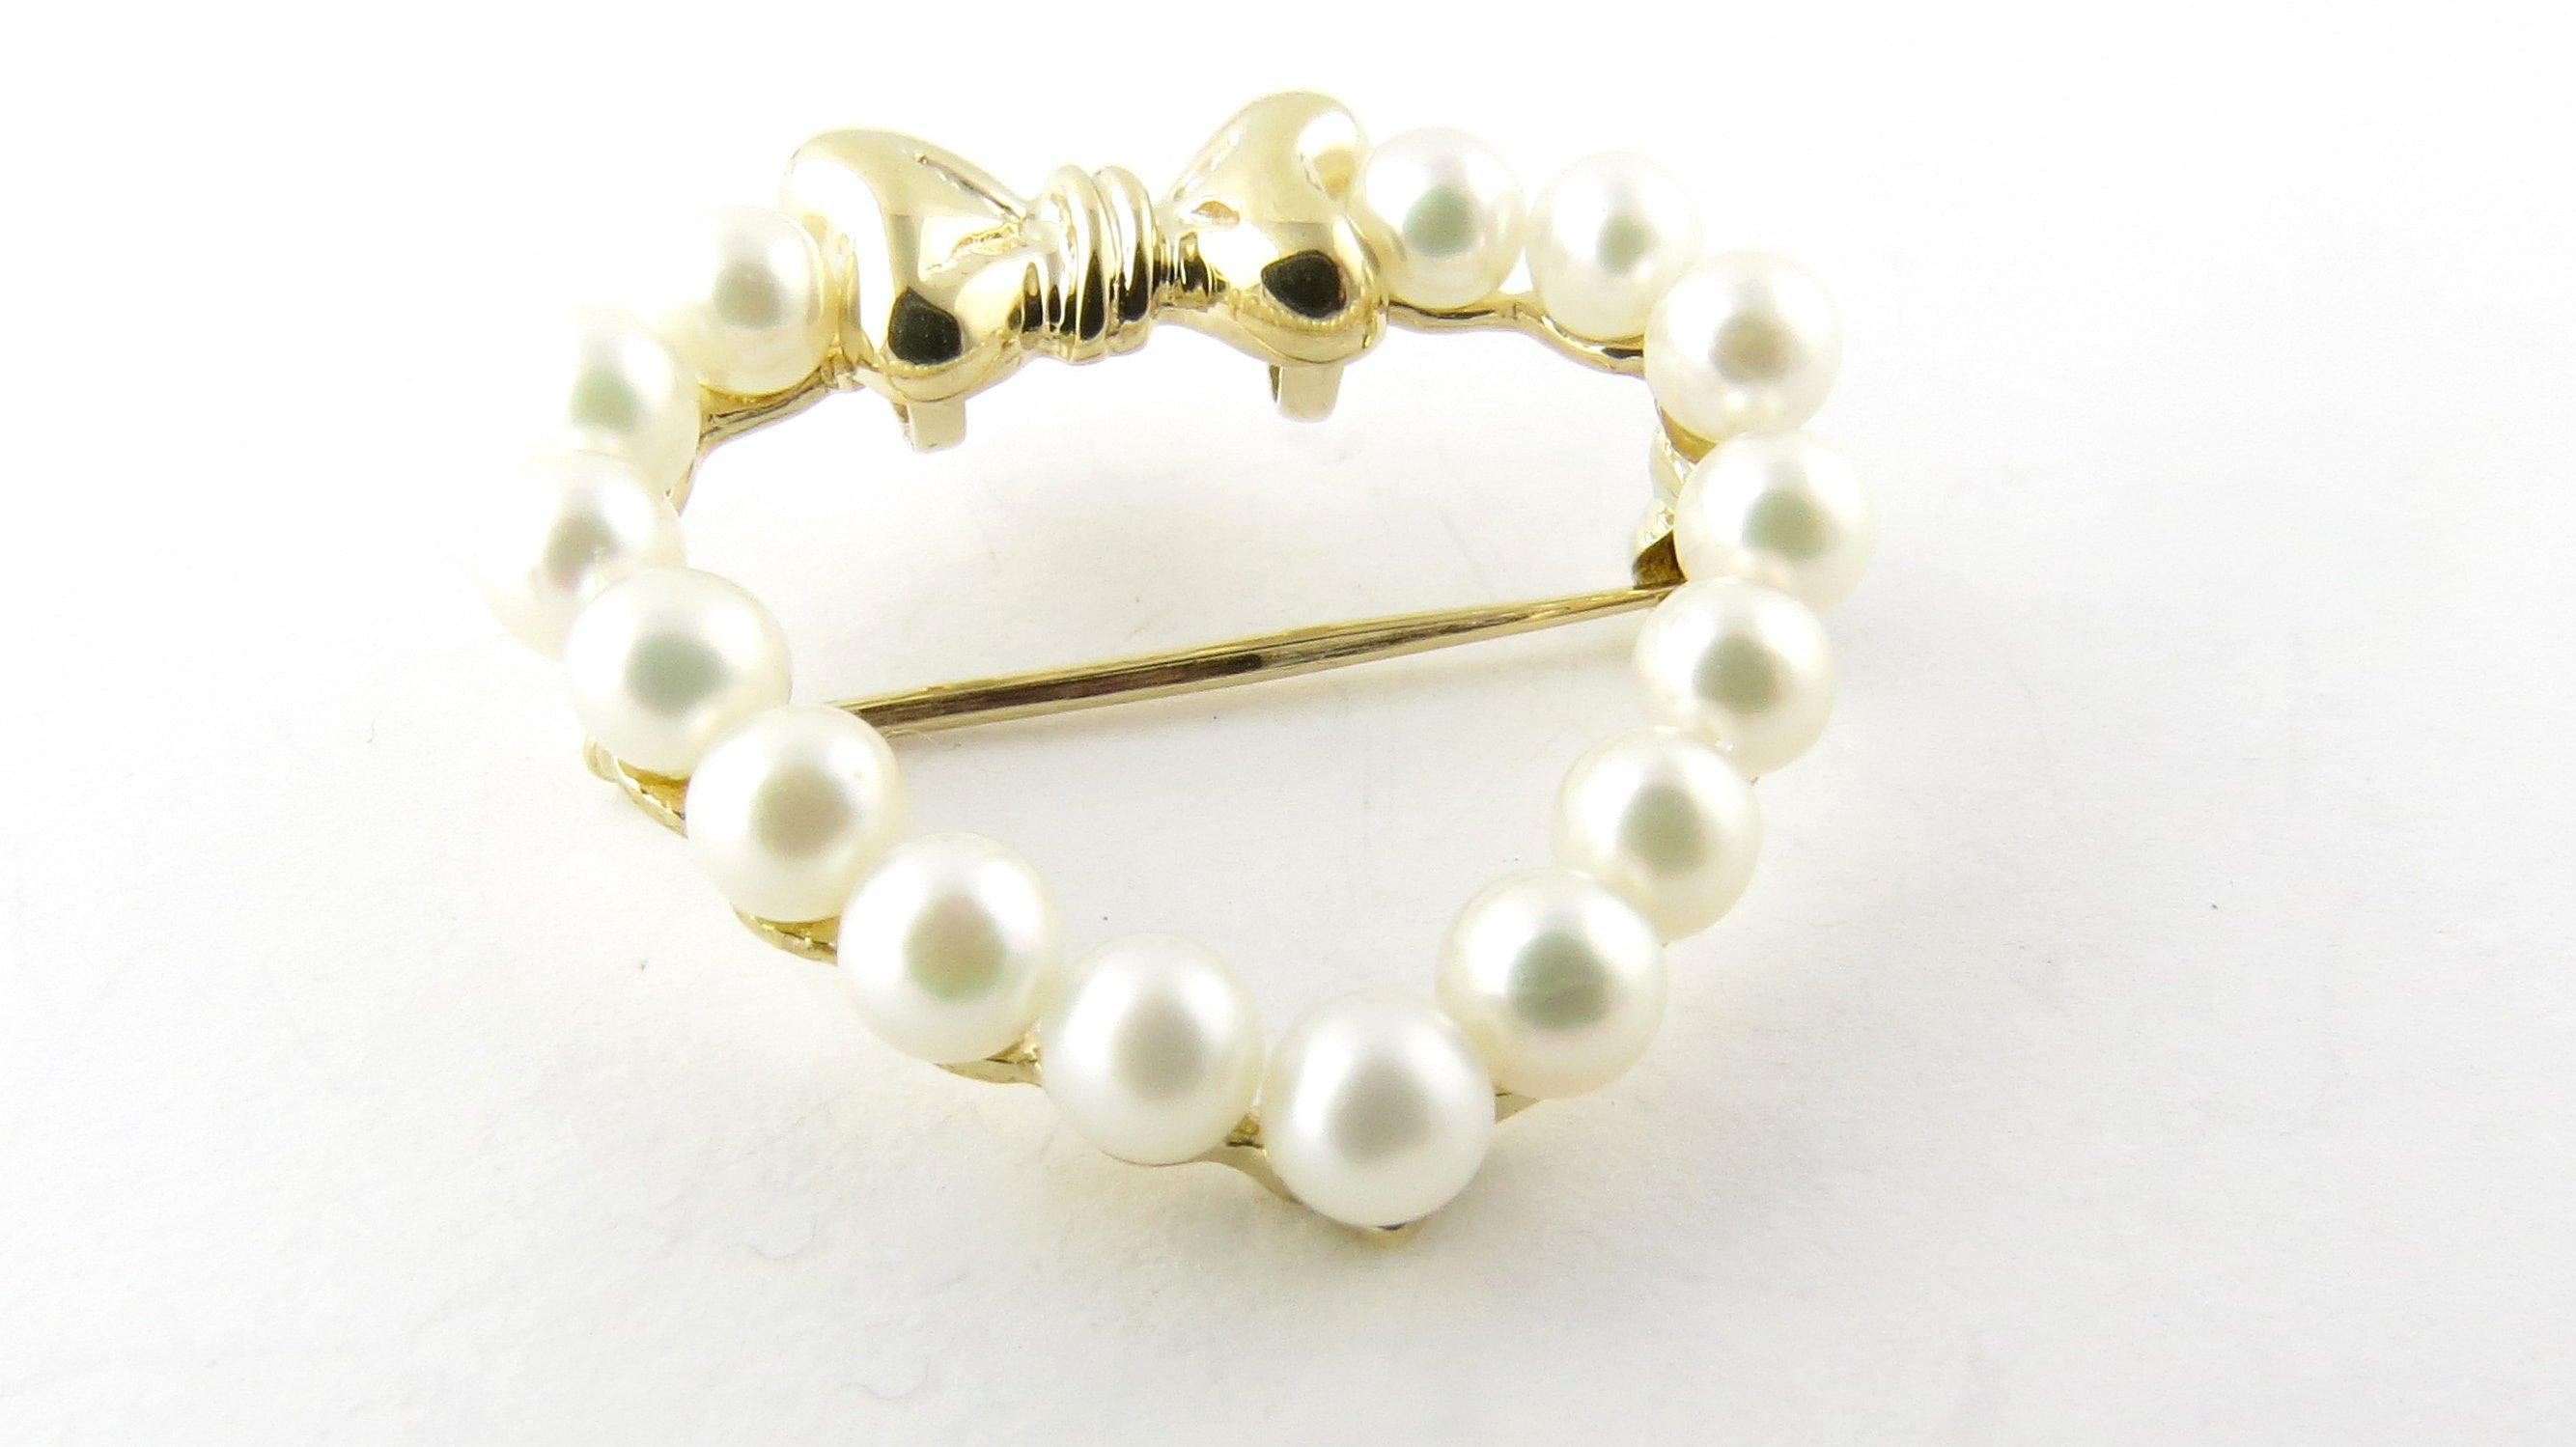 Vintage 14 Karat Yellow Gold and Pearl Heart Brooch/Pin- 
This stunning heart brooch is decorated with 15 lovely pearls (3 mm each) accented with a feminine bow detail and set in 14K yellow gold. 
Size: 25 mm x 25 mm 
Weight: 1.8 dwt. / 2.9 gr.